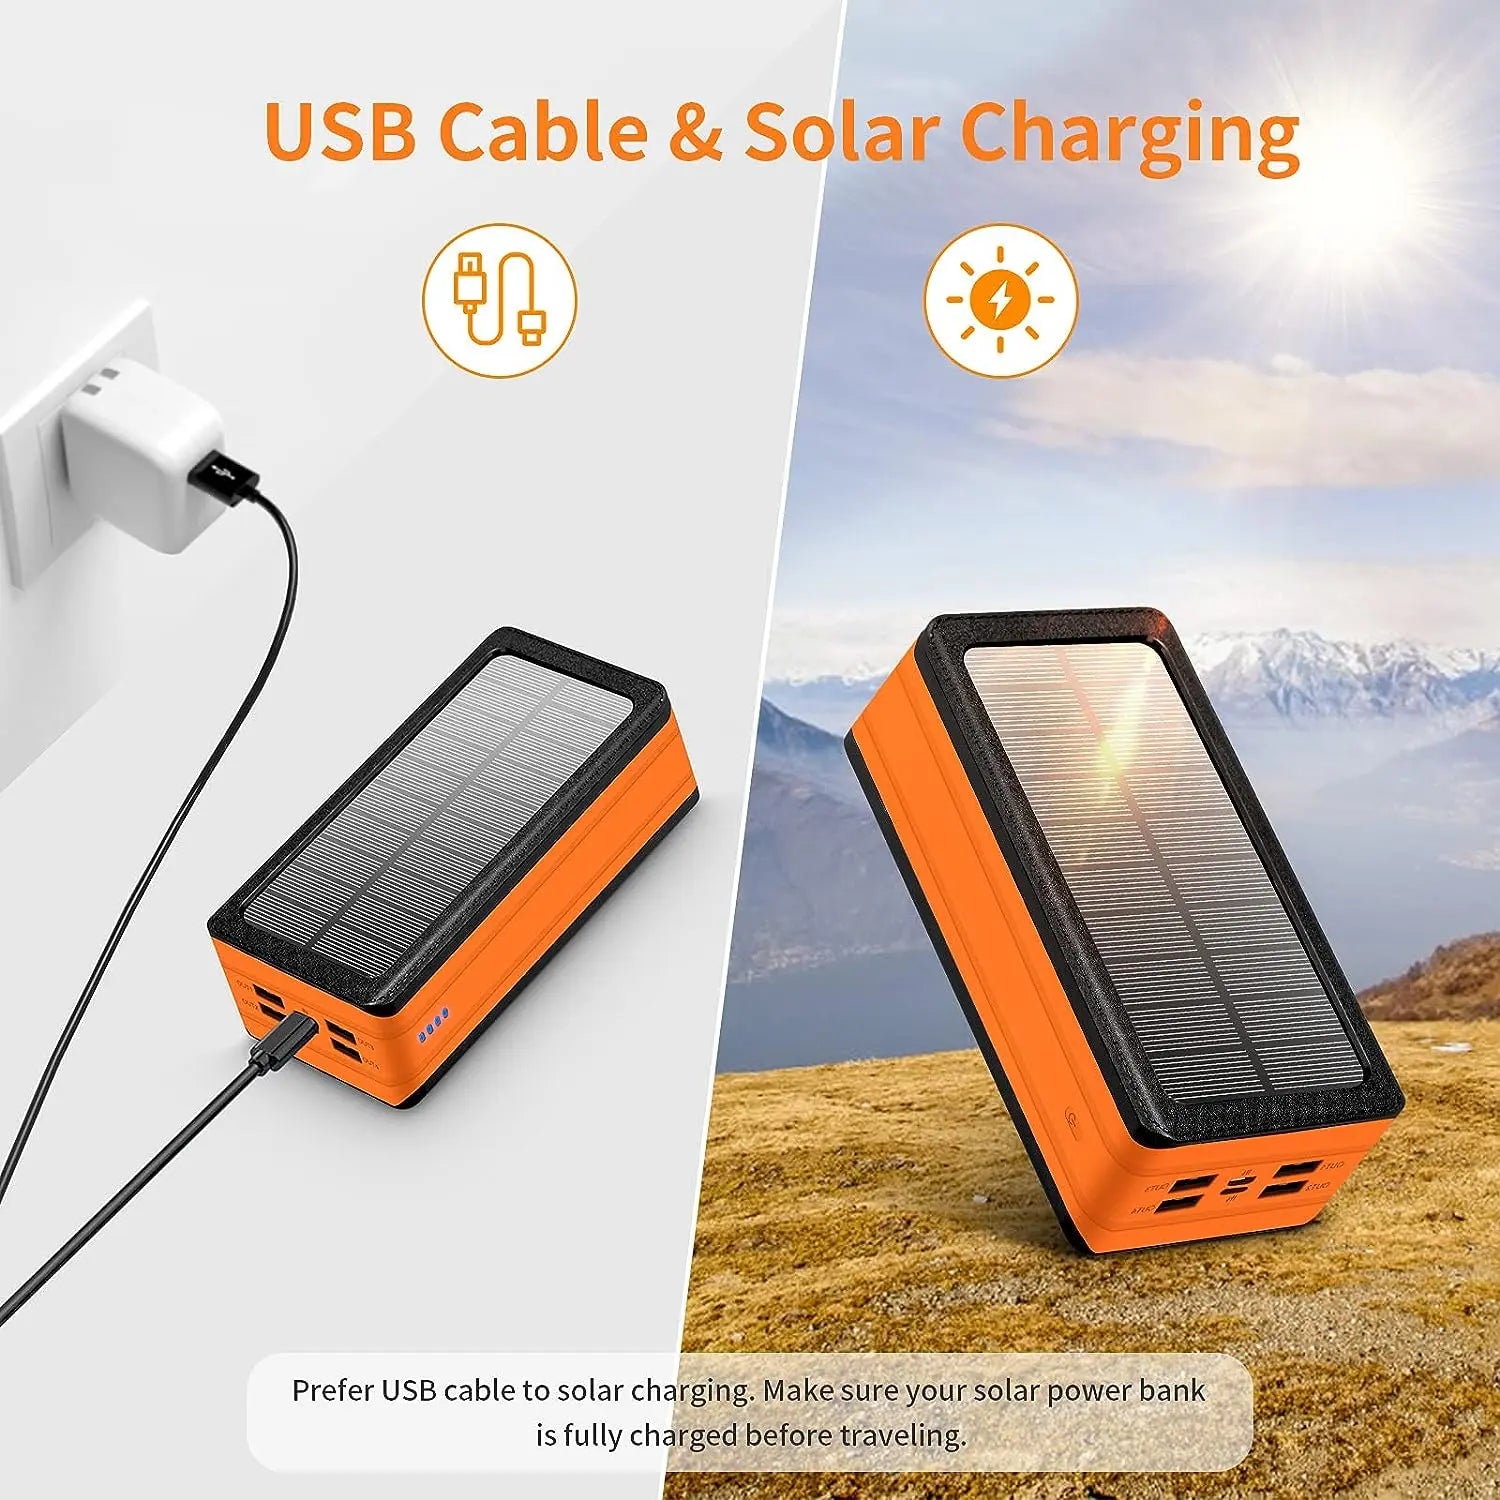 https://www.solarhubstore.com/cdn/shop/files/Solar-Power-Bank-50000Mah_-Portable-Solar-Phone-Charger-with-Flashlight_-4-Output-Ports_-2-Input-Ports_-Solar-Battery-Bank-Compatible-with-Iphone-for-Camping_-Hiking_-Trips-PSOOO-1693_16bf0754-bad5-432f-9c58-0ac2a2748378.jpg?v=1693235393&width=1500